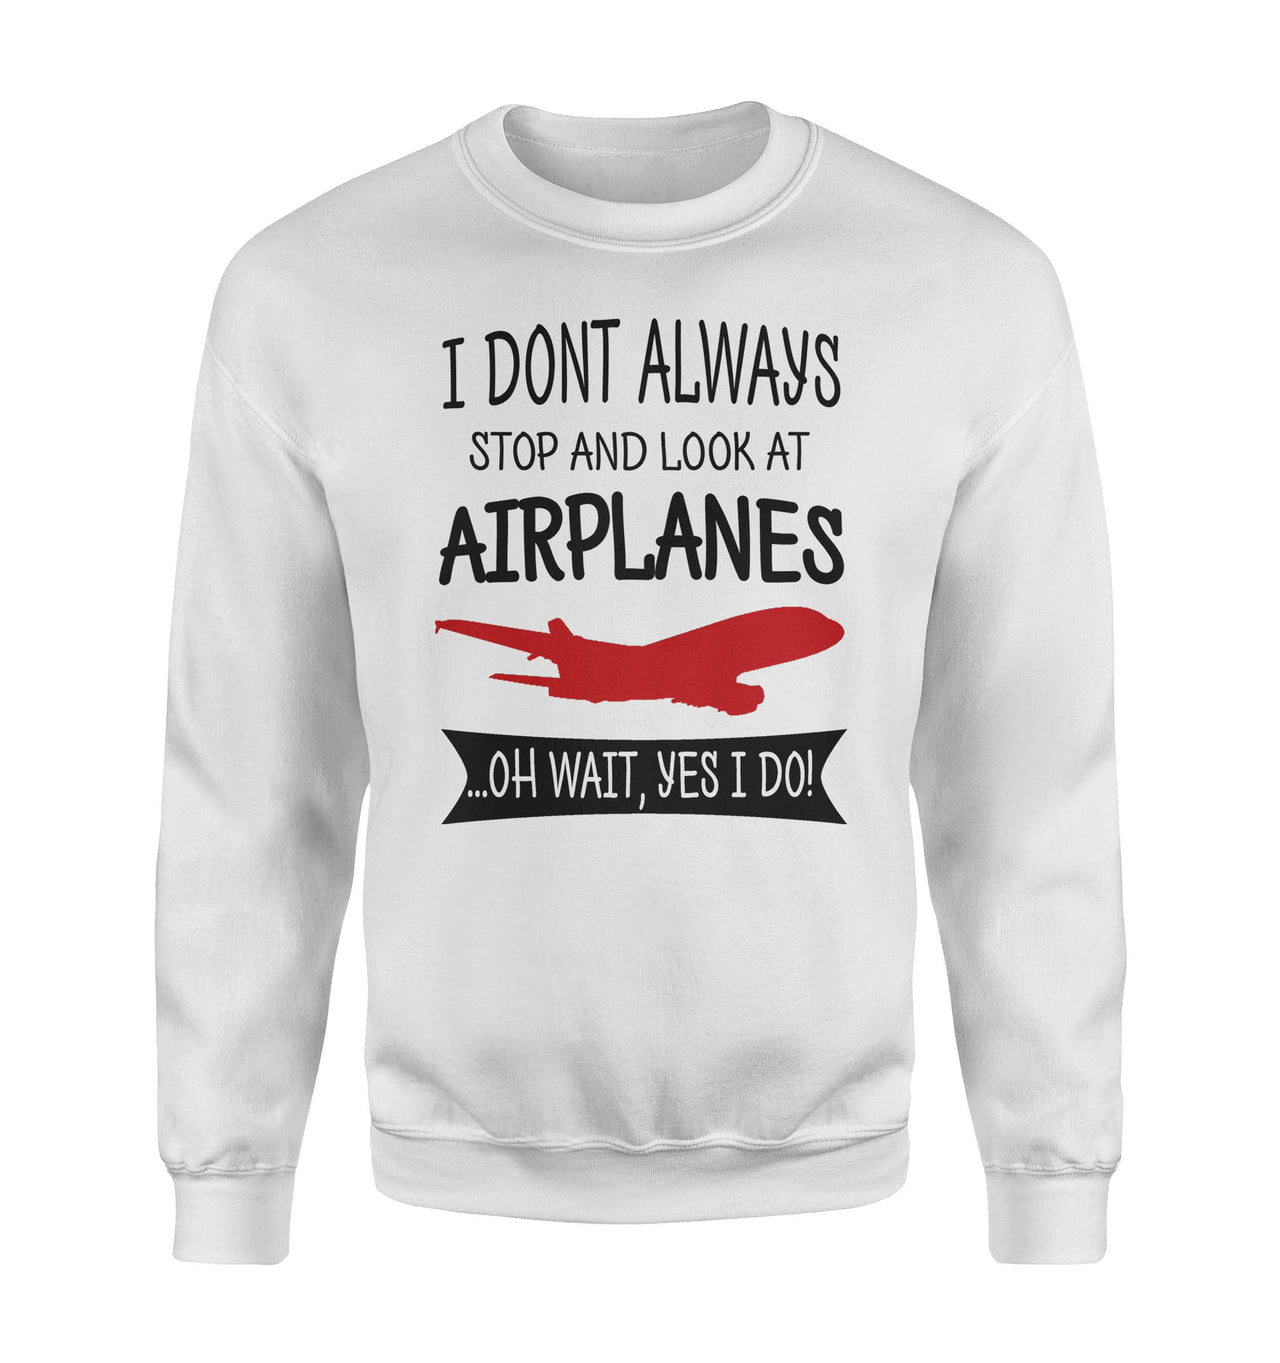 I Don't Always Stop and Look at Airplanes Designed Sweatshirts